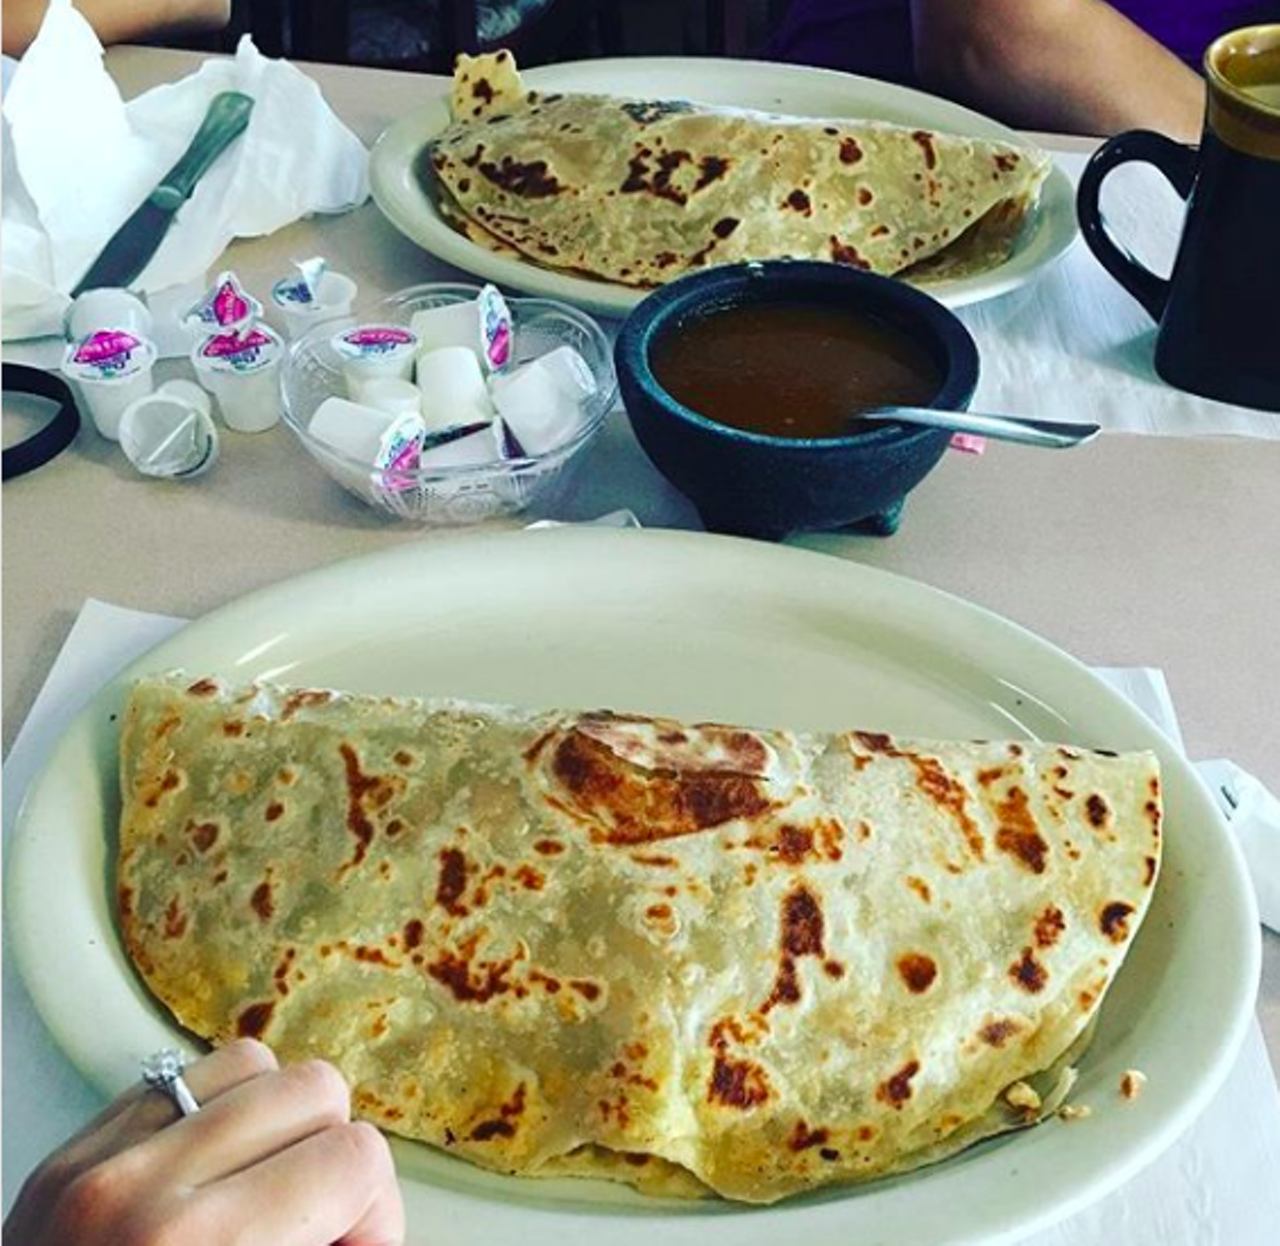 Realizing that San Antonio “Super Tacos” are basically our breakfast tacos.
Our breakfast tacos have the kind of girth to cover an entire plate. Some visitors accidentally order two their first time around and are in for quite a surprise. 
Photo via Instagram / inga_hdz